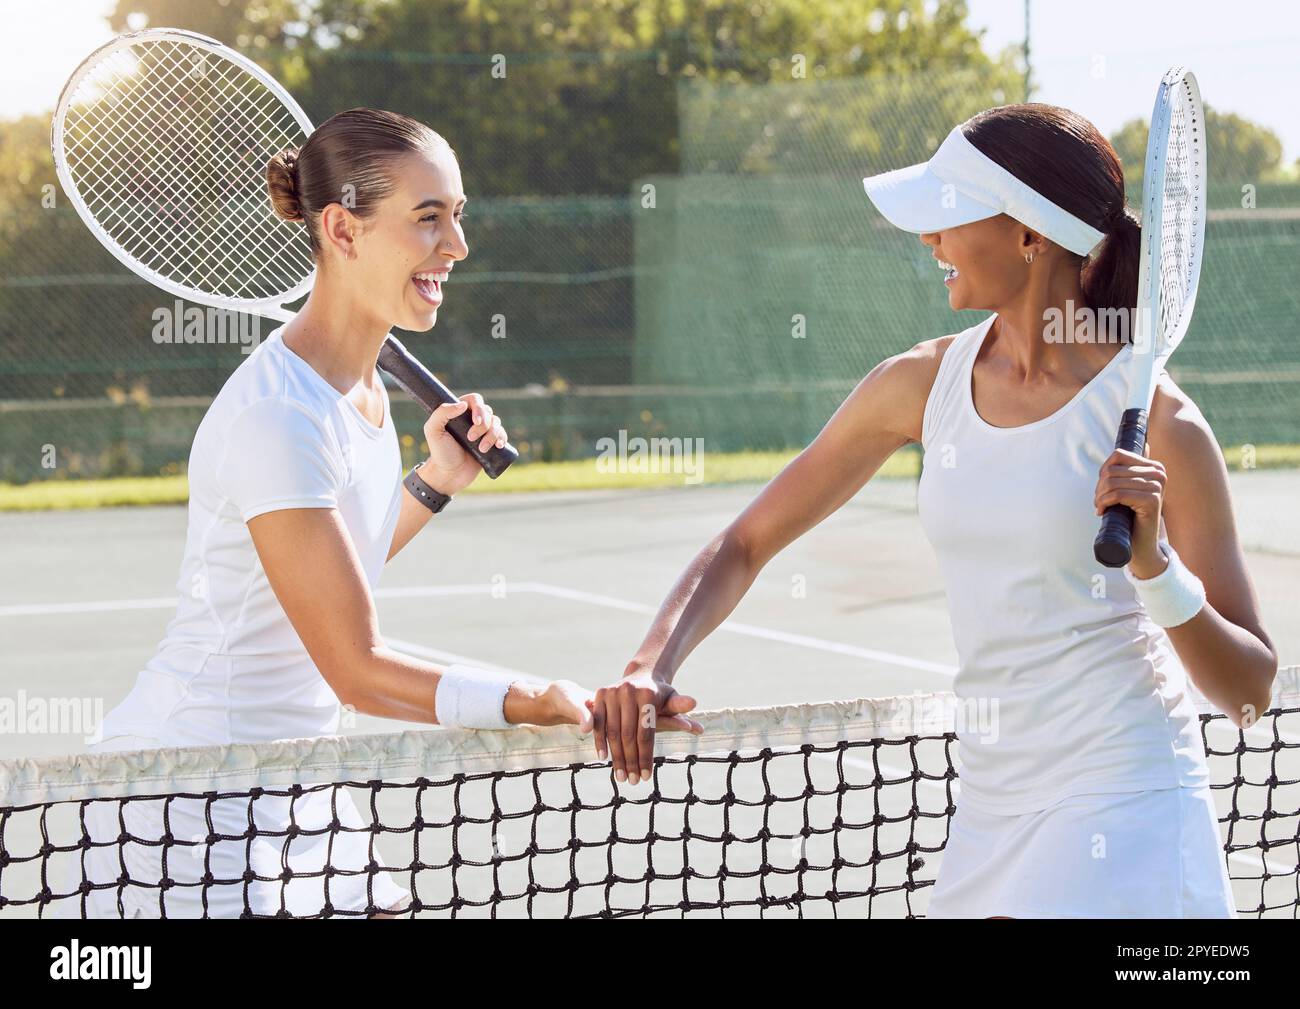 Tennis, friends and match in sports fitness and training for friendly game at the outdoor court. Happy women in sport competition holding rackets for fun workout or exercise together in sportsmanship Stock Photo